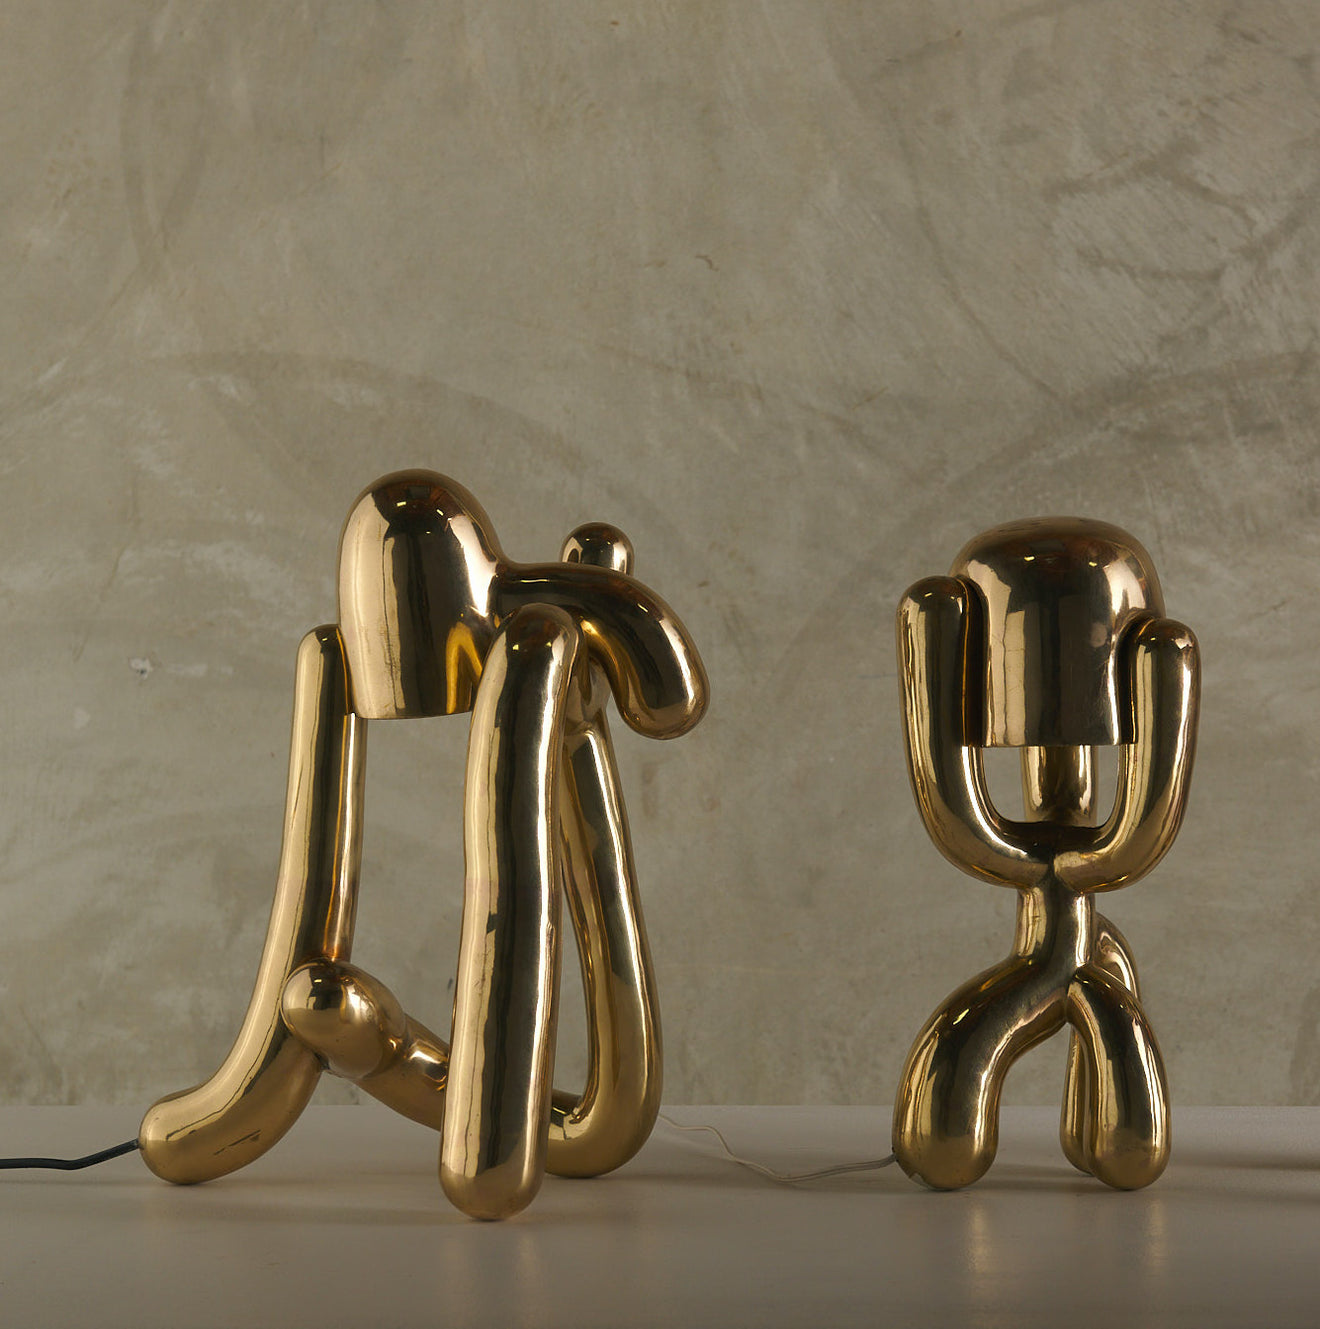 FOOLS GOLD LAMP(S) BY MARCELO SURO